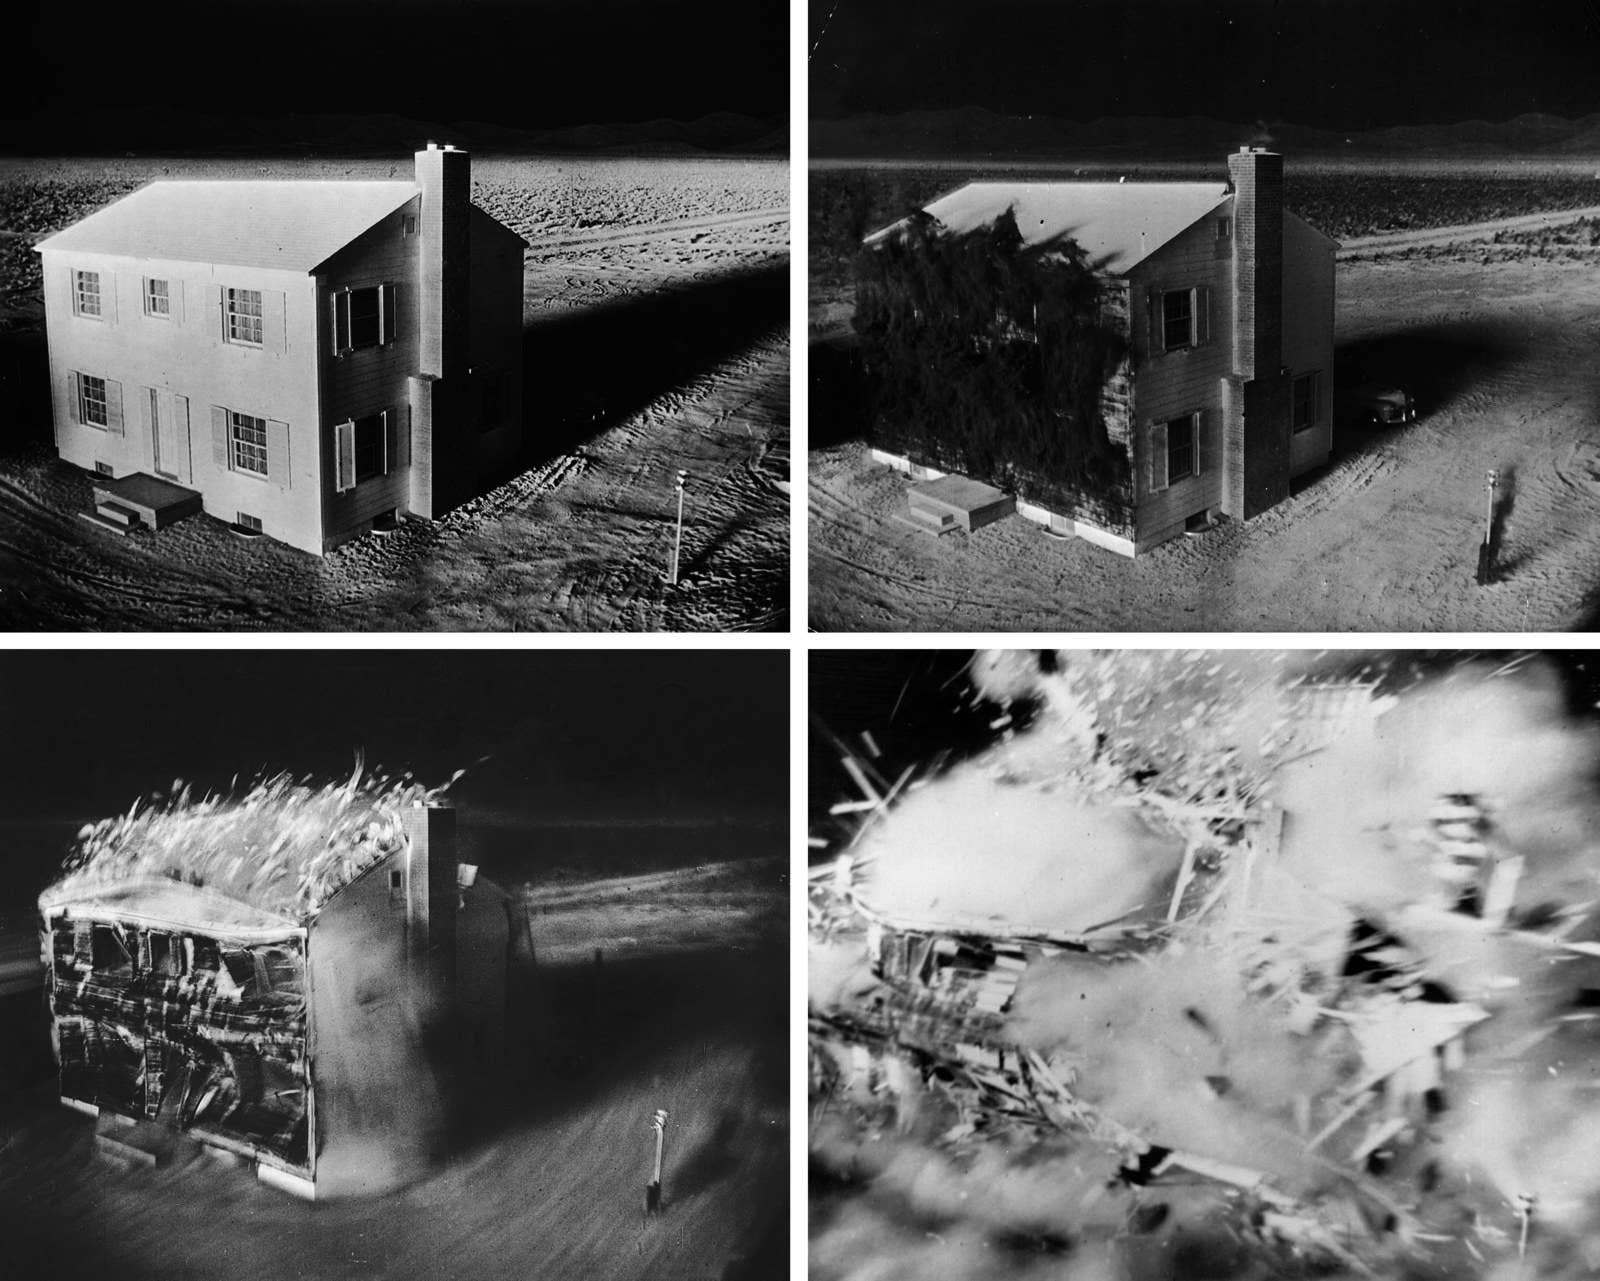 This series taken by an automatic camera in 1953 shows the effects of an atomic bomb on a house built 1 mile from the point of detonation, over a period of 2.3 seconds.